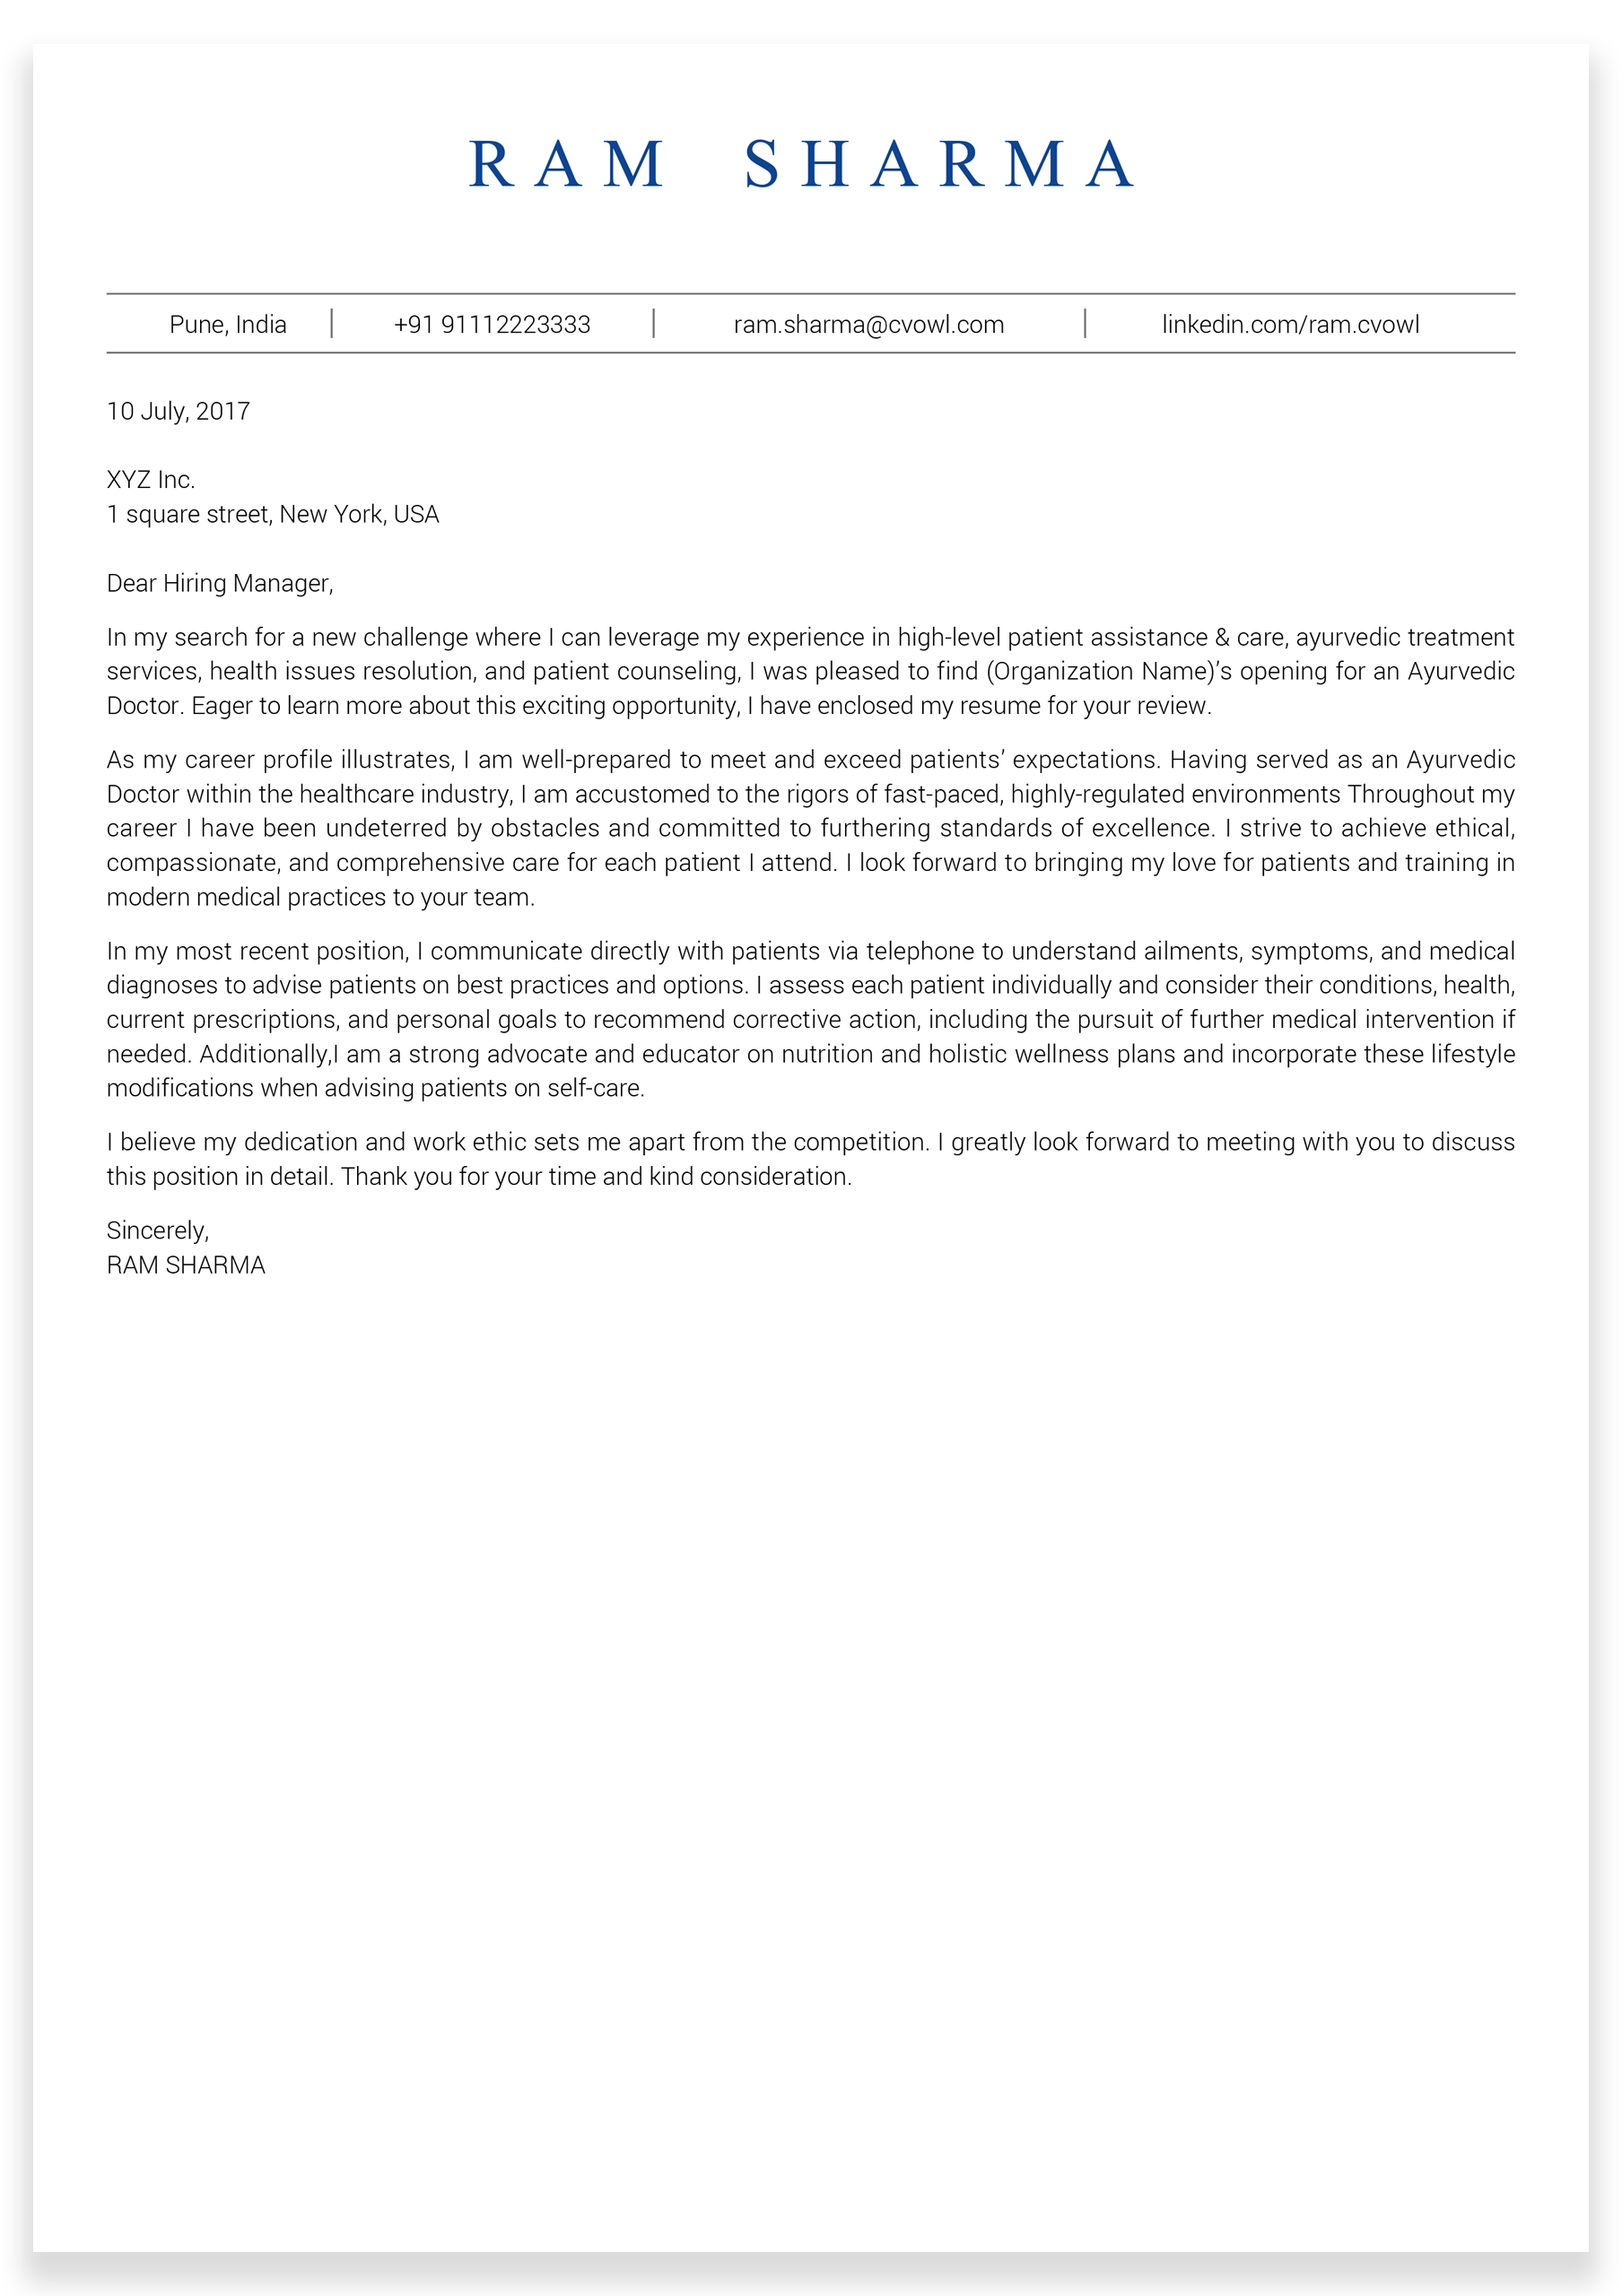 Civil-Structural-Engineer-Cover-Letter-sample11